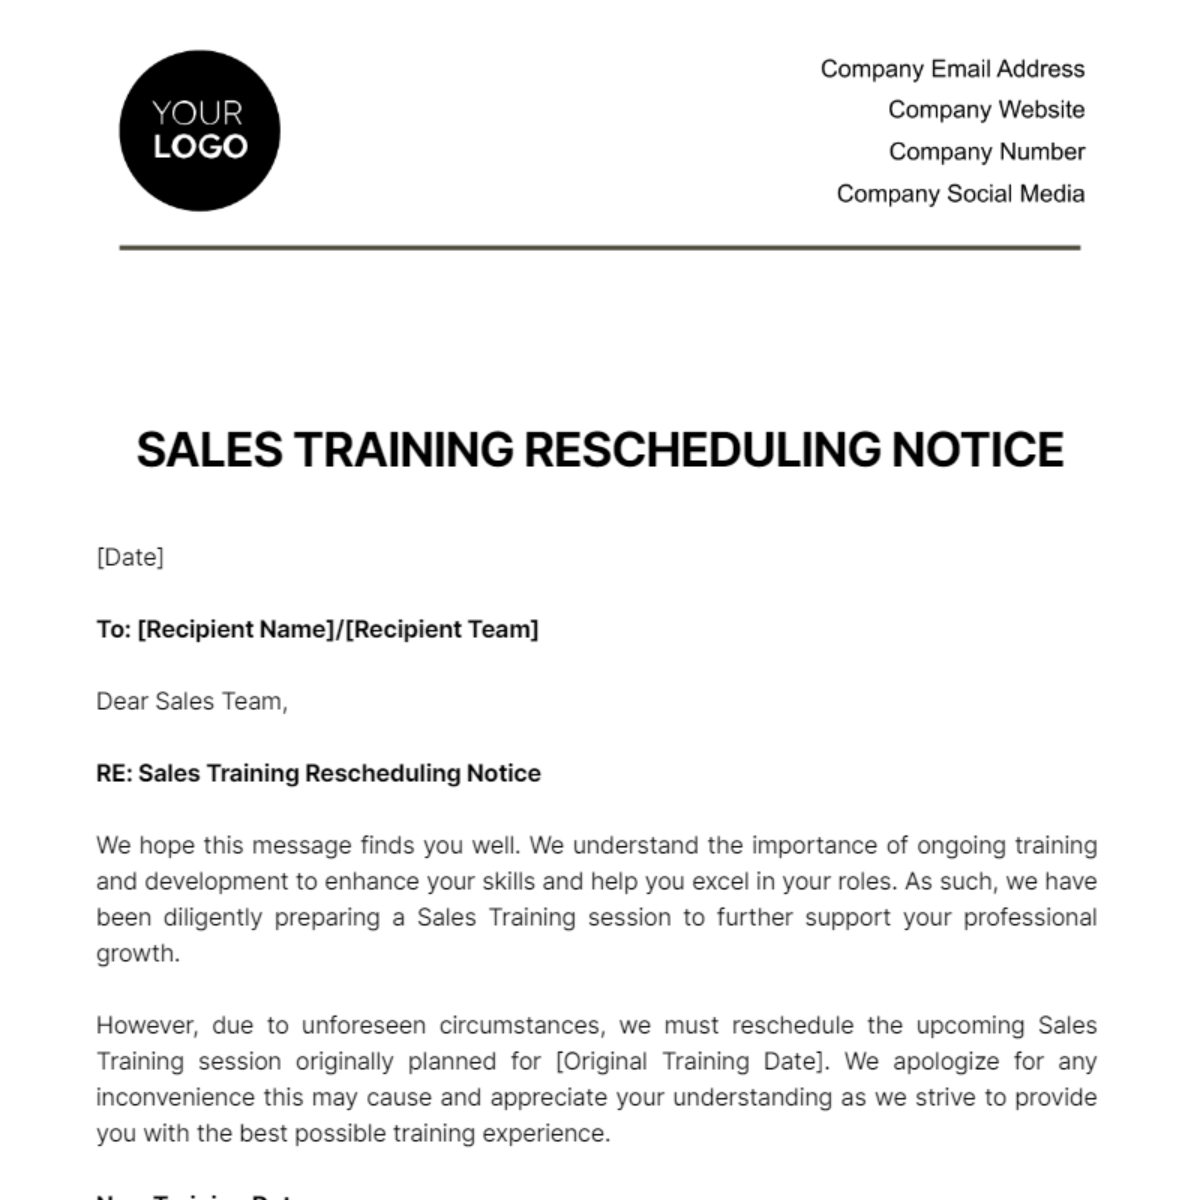 Sales Training Rescheduling Notice Template